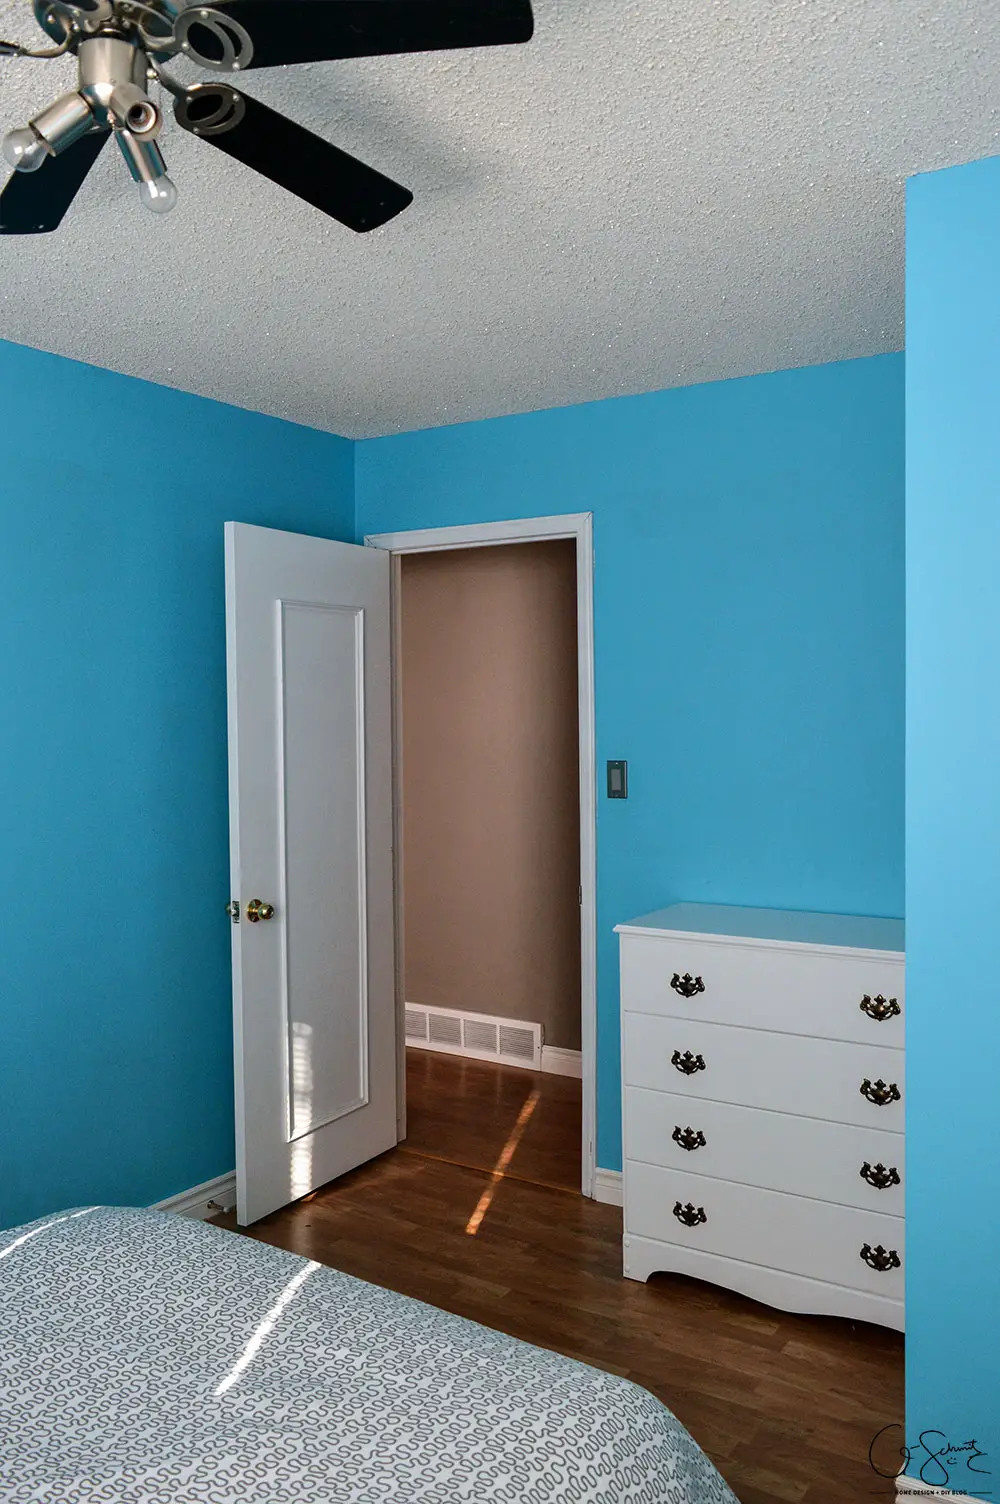 We use The Blue Room as a guest bedroom; and although I don't think the bright colour is very calming, at least our guests won't have any problems waking?